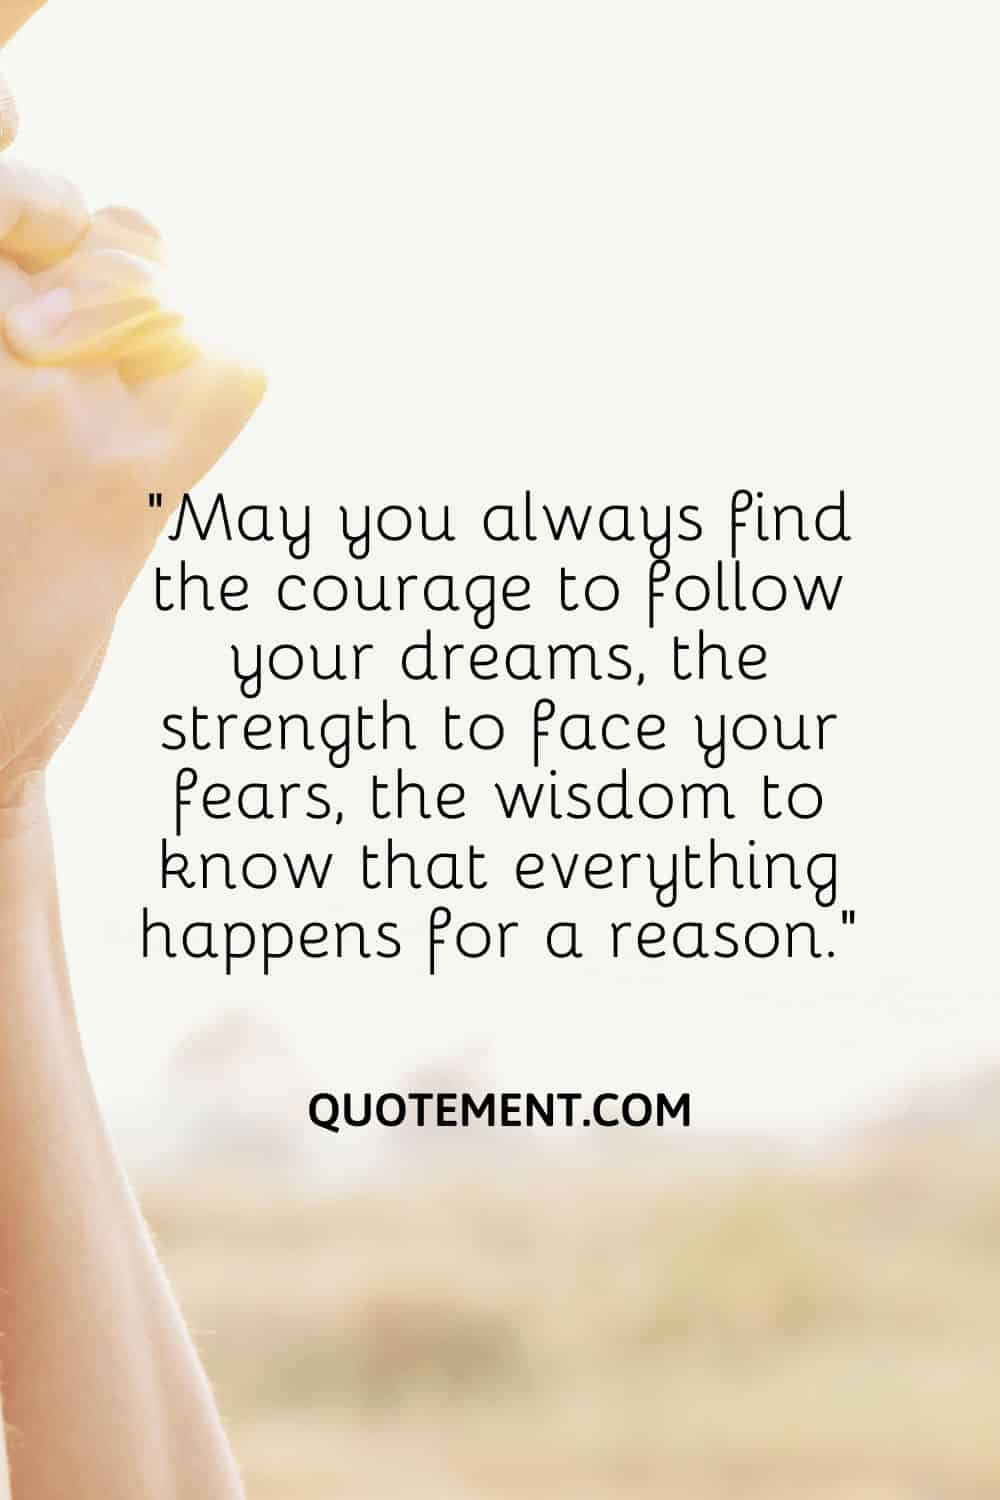 “May you always find the courage to follow your dreams, the strength to face your fears, the wisdom to know that everything happens for a reason.”